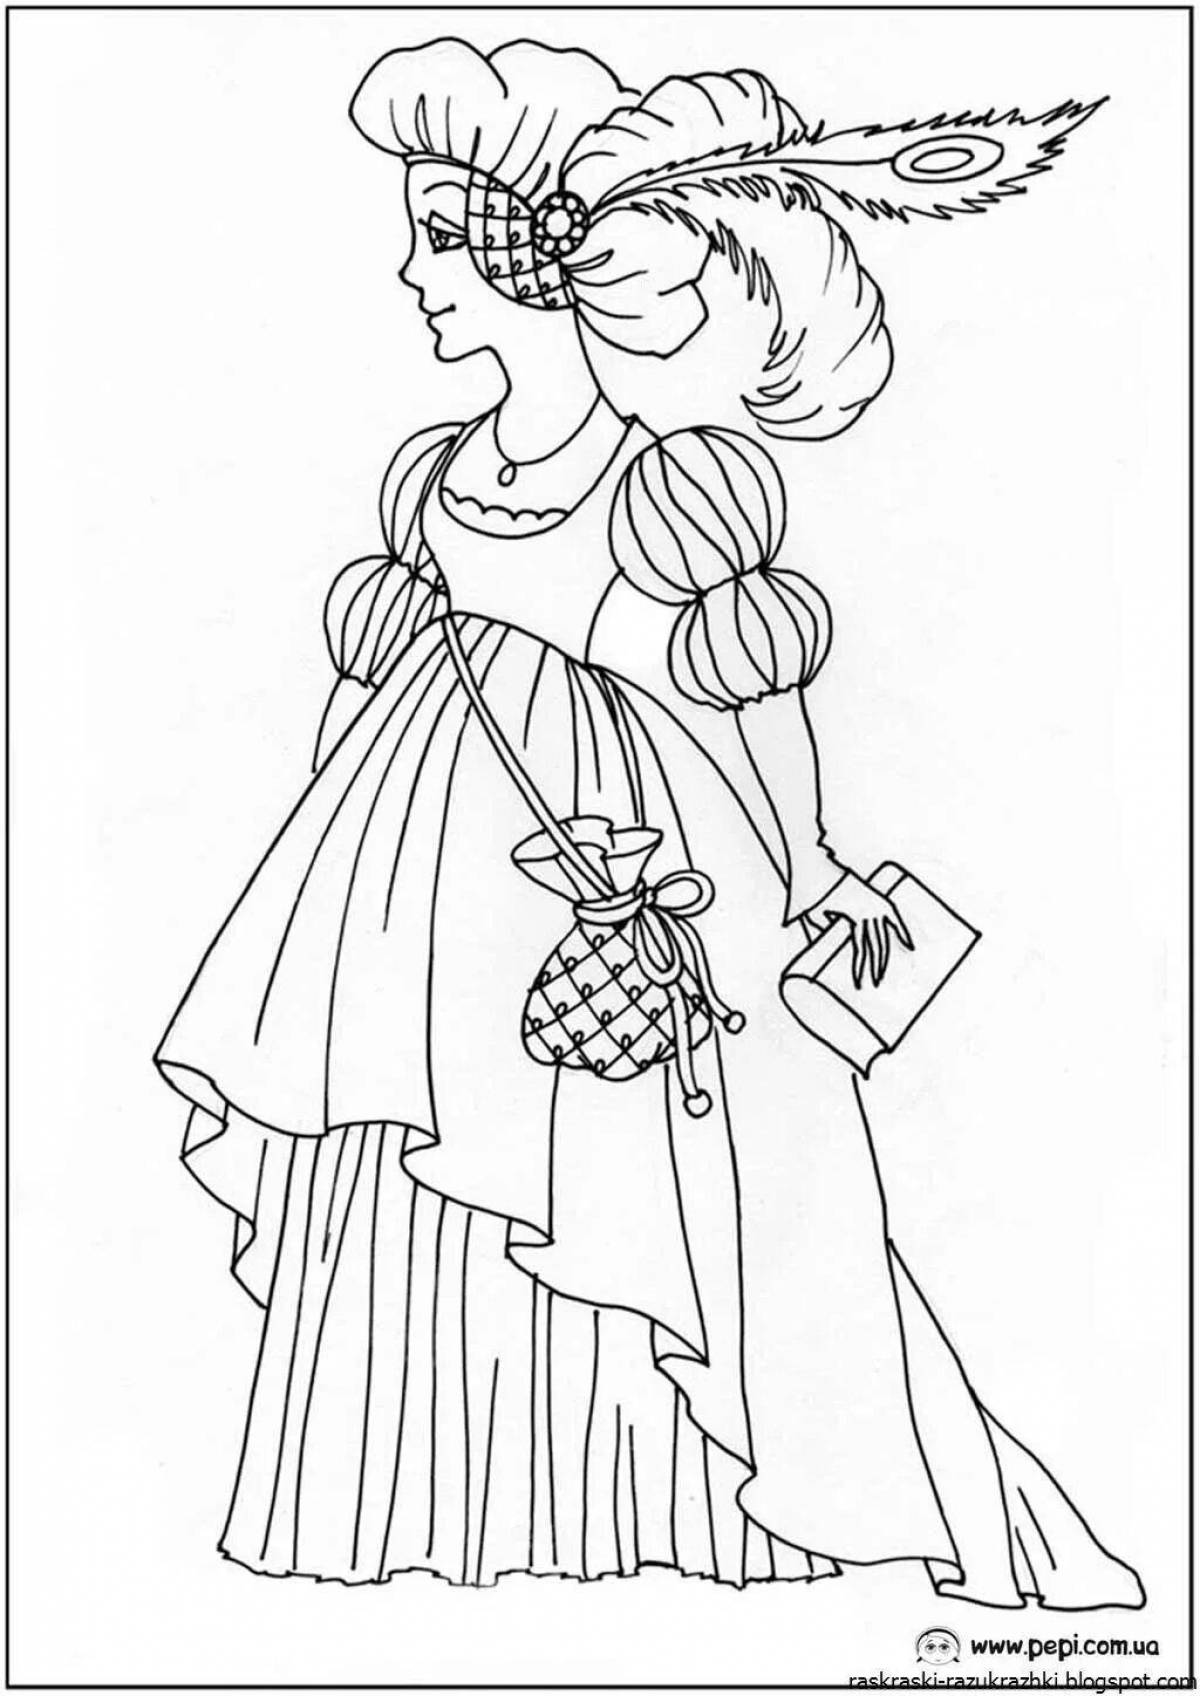 Dramatic theatrical costume coloring page